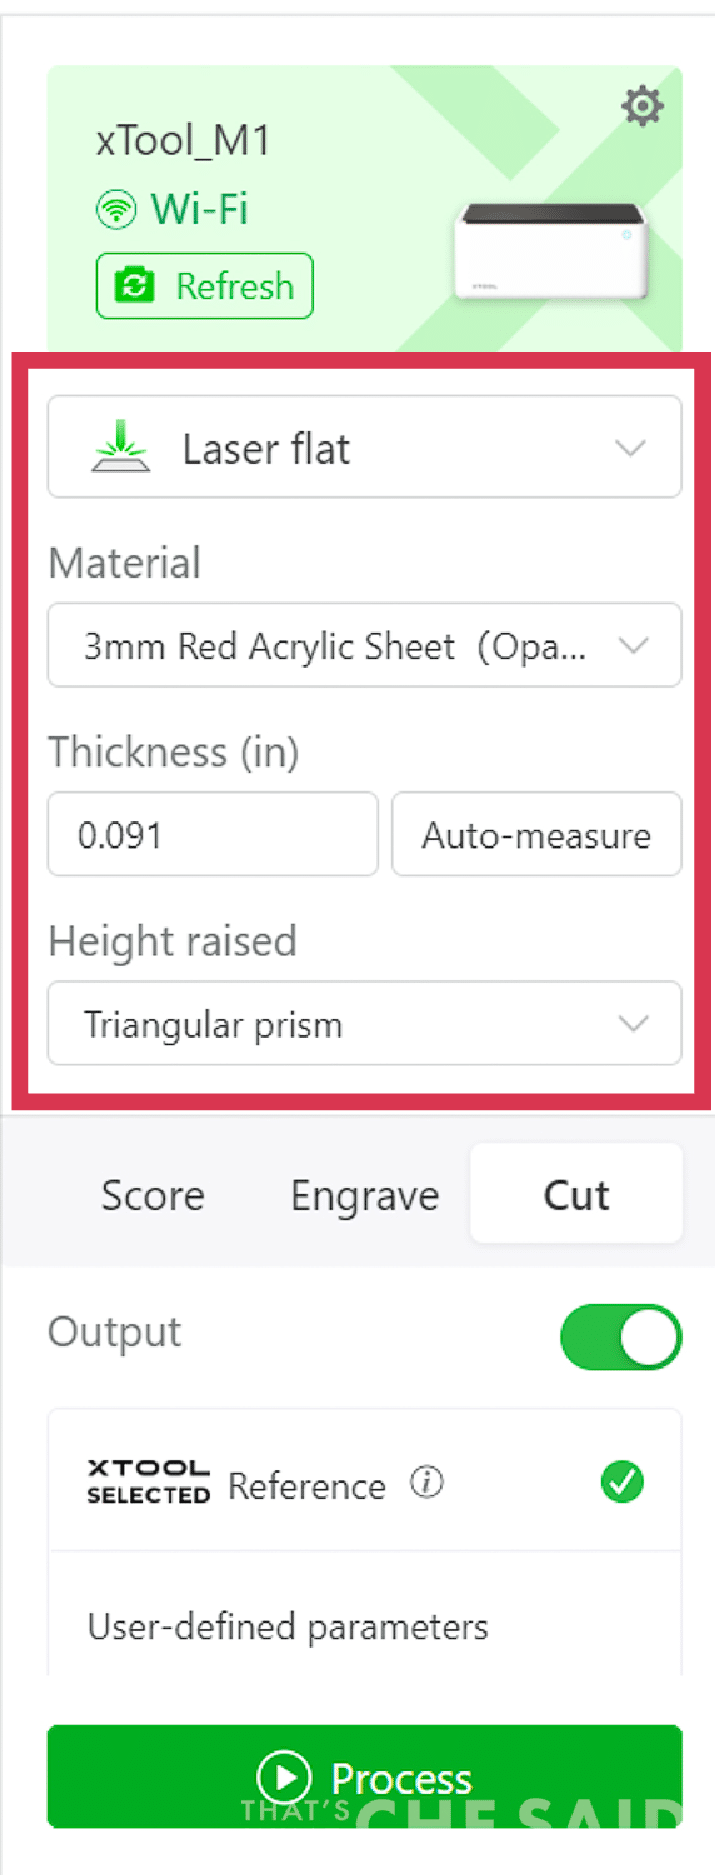 Settings on xTool M1 for Red Acrylic